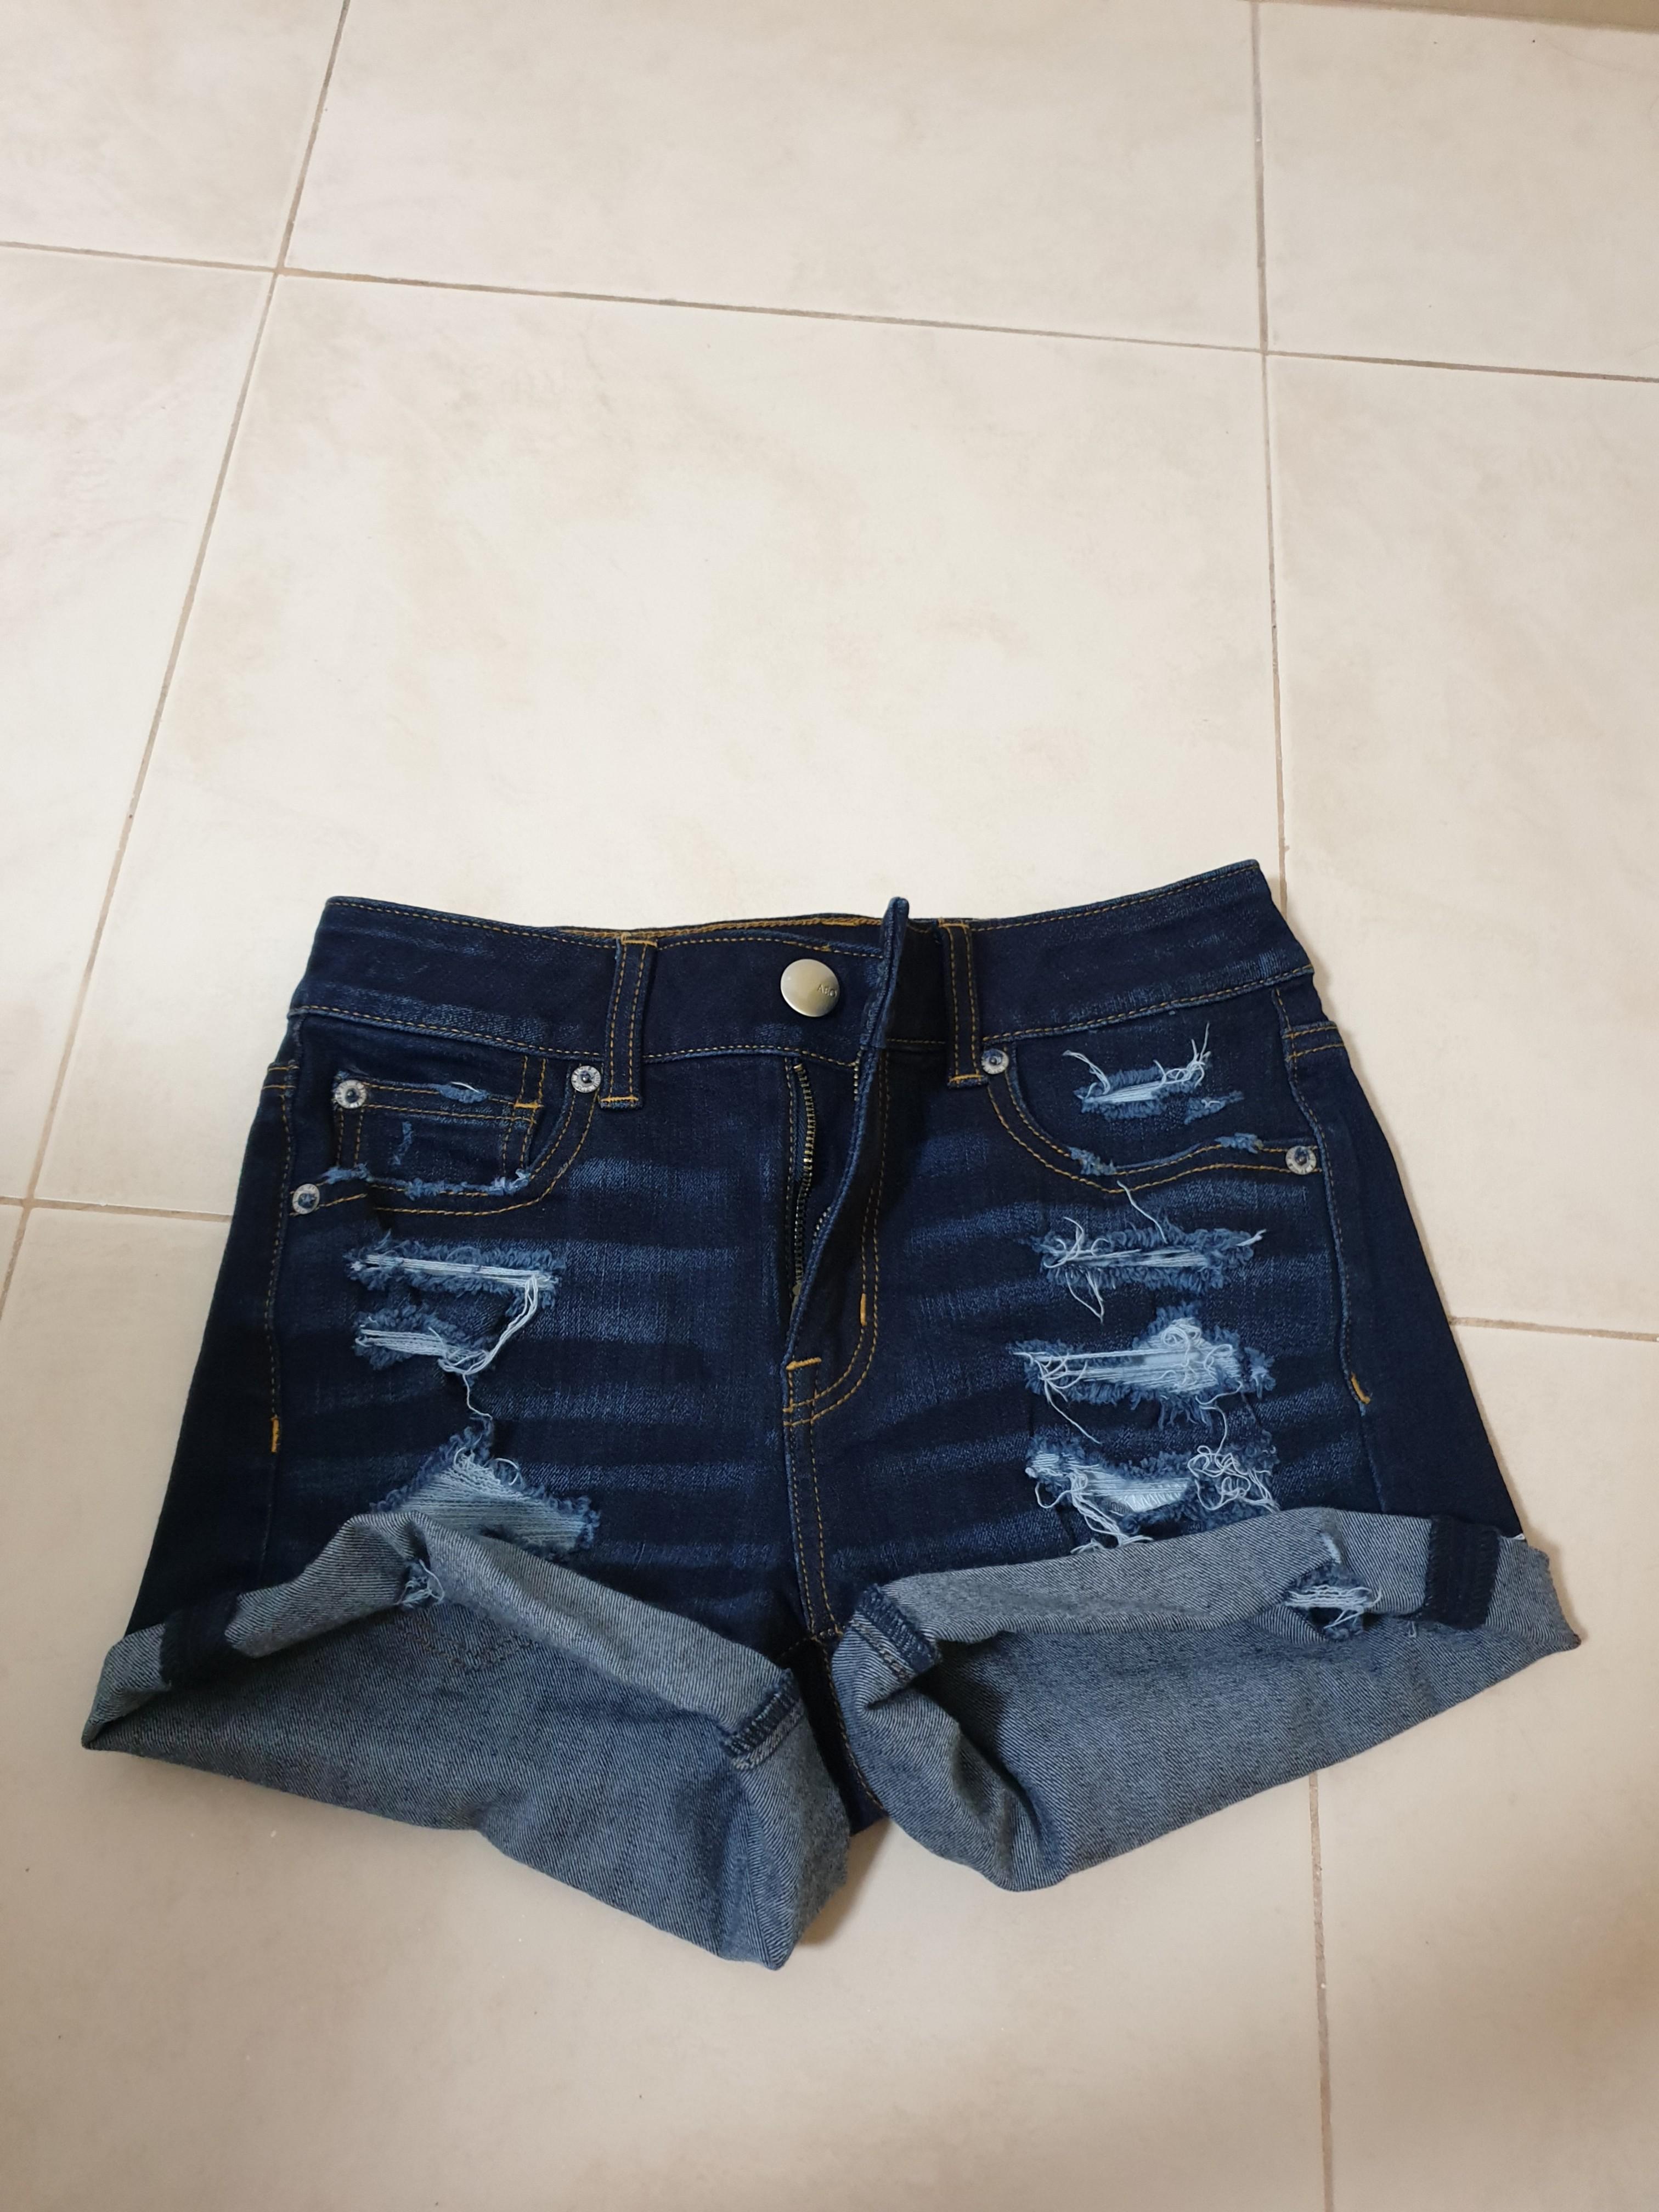 american eagle outfitters high waisted shorts